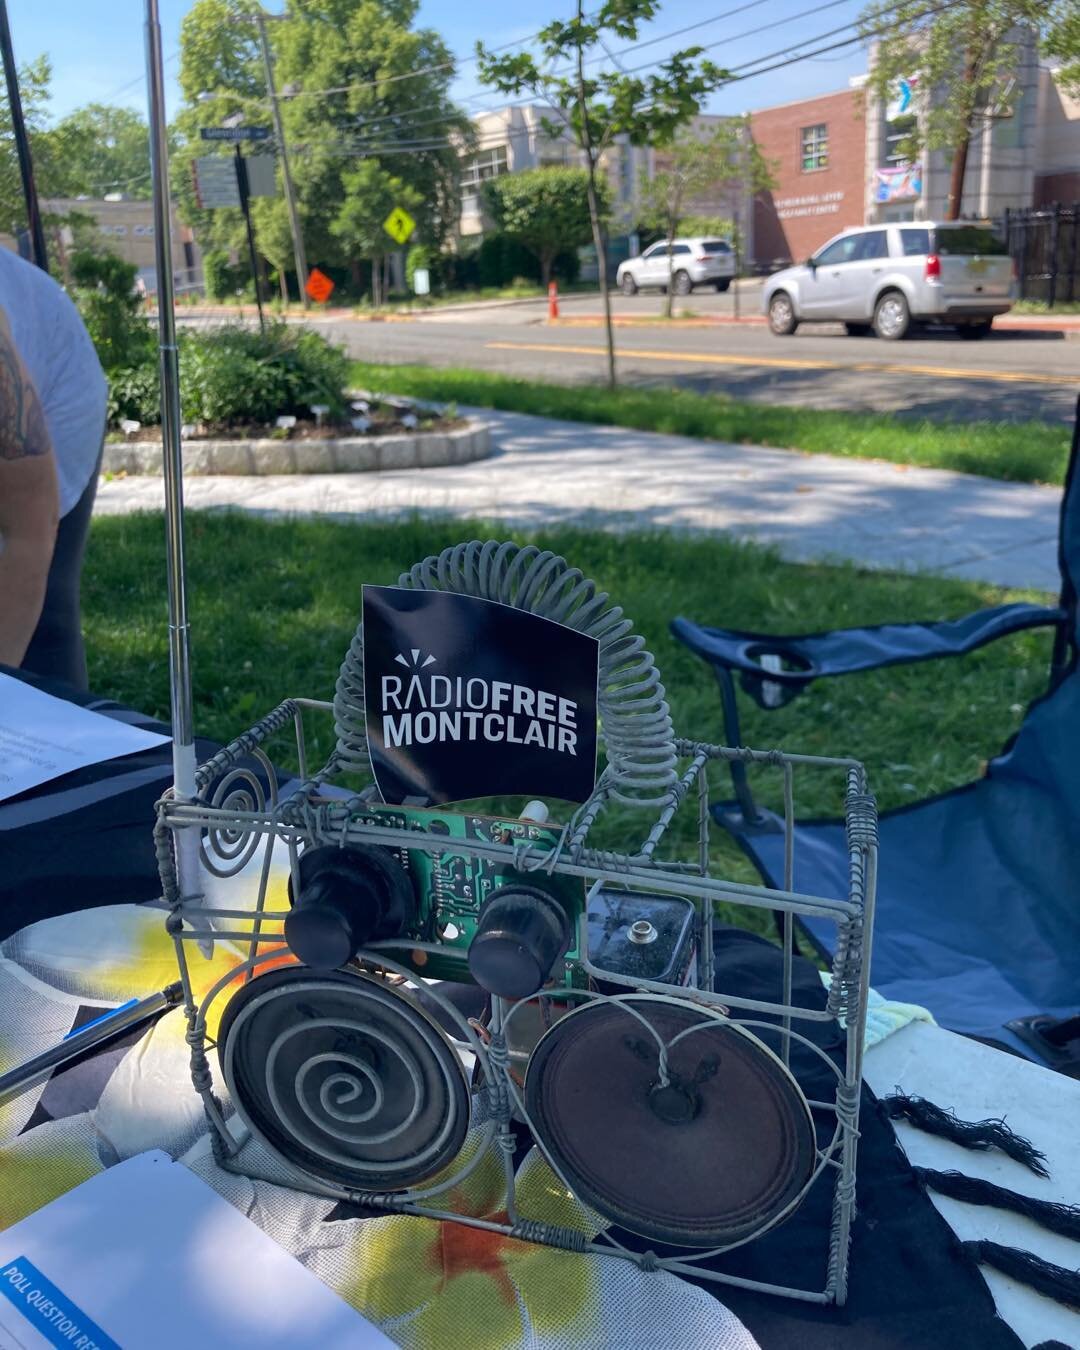 Great day to get out on your bike or walk down to crane park for great music for a great cause stop by the  Radio free Montclair table and learn about a great new community radio station coming to Montclair this summer!!!!